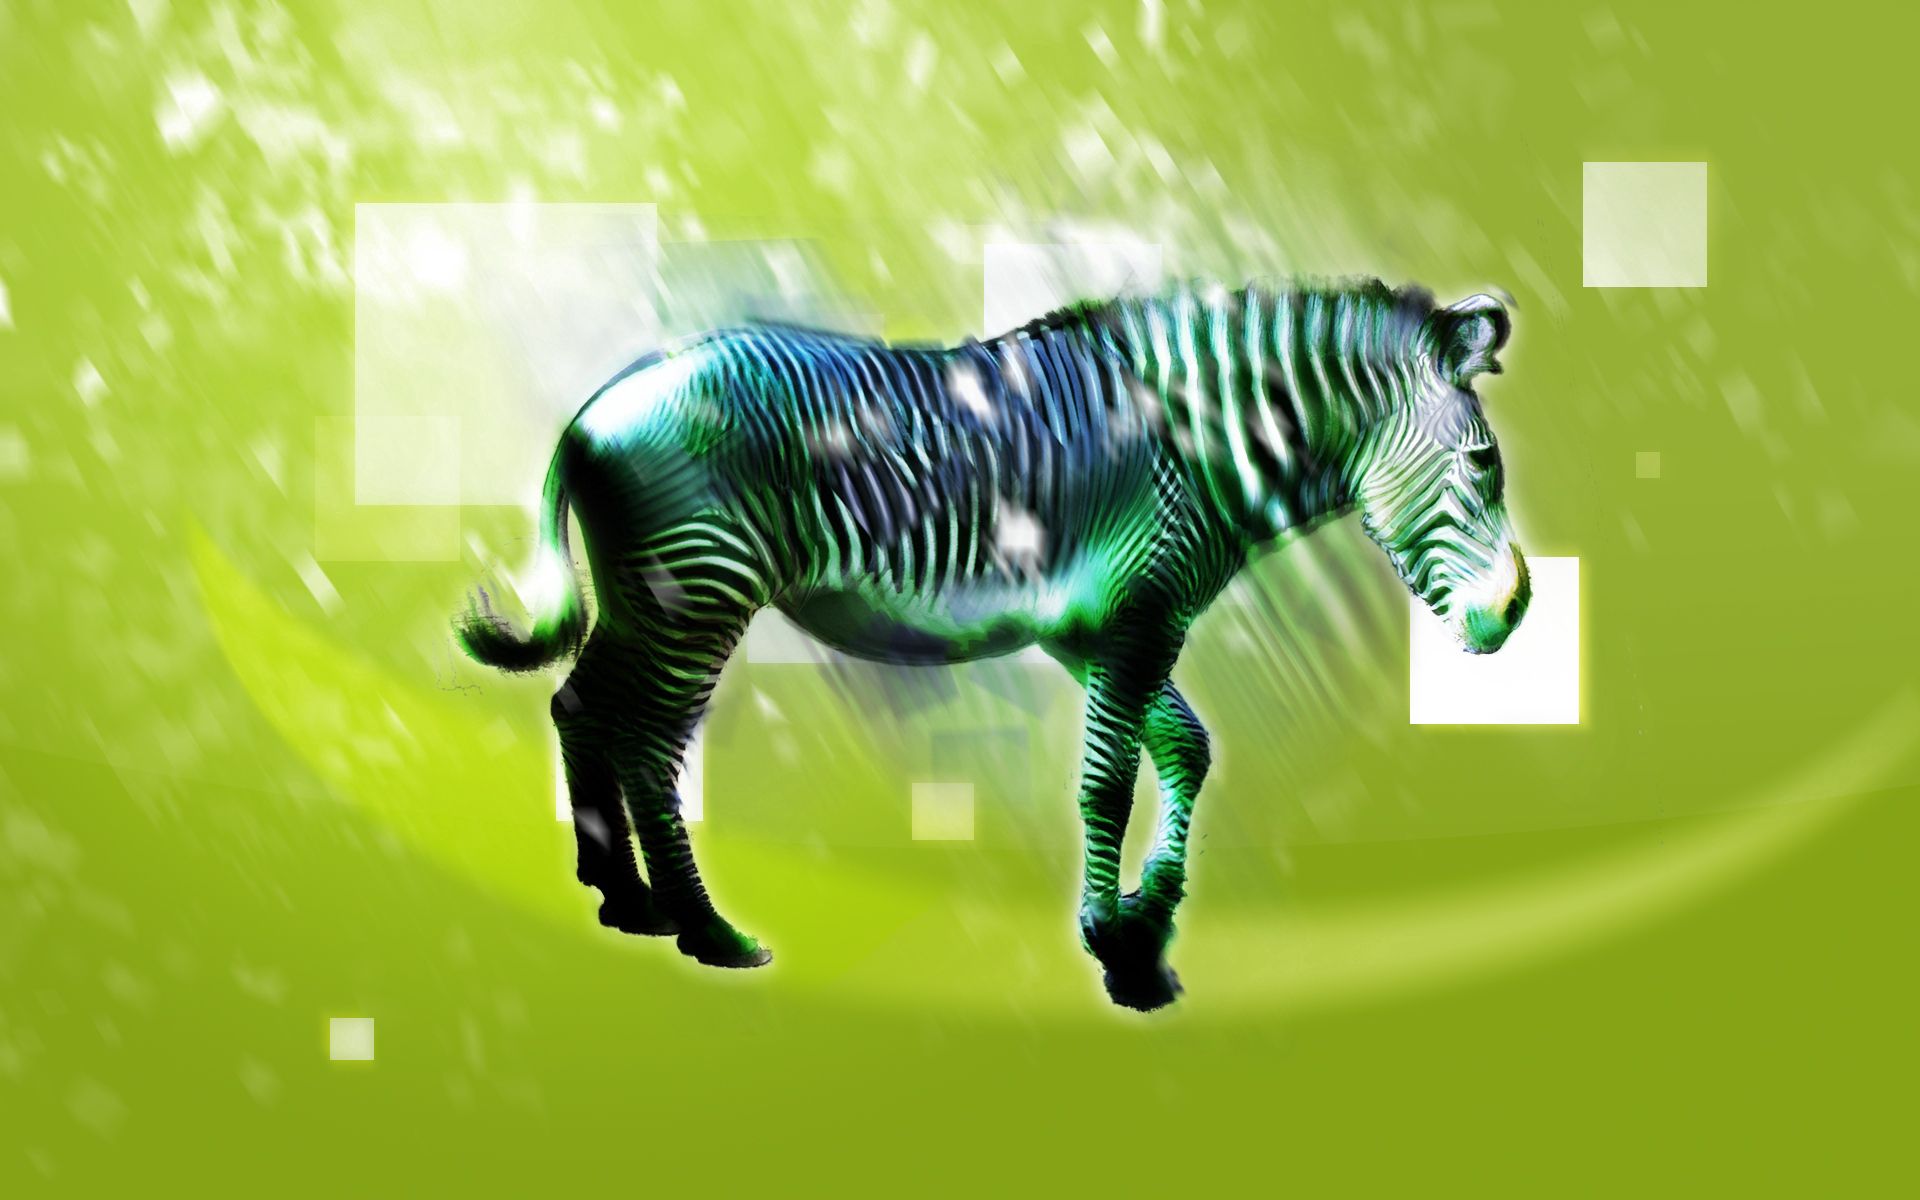 zebra, abstract, shine, light, picture, drawing, light coloured, animal